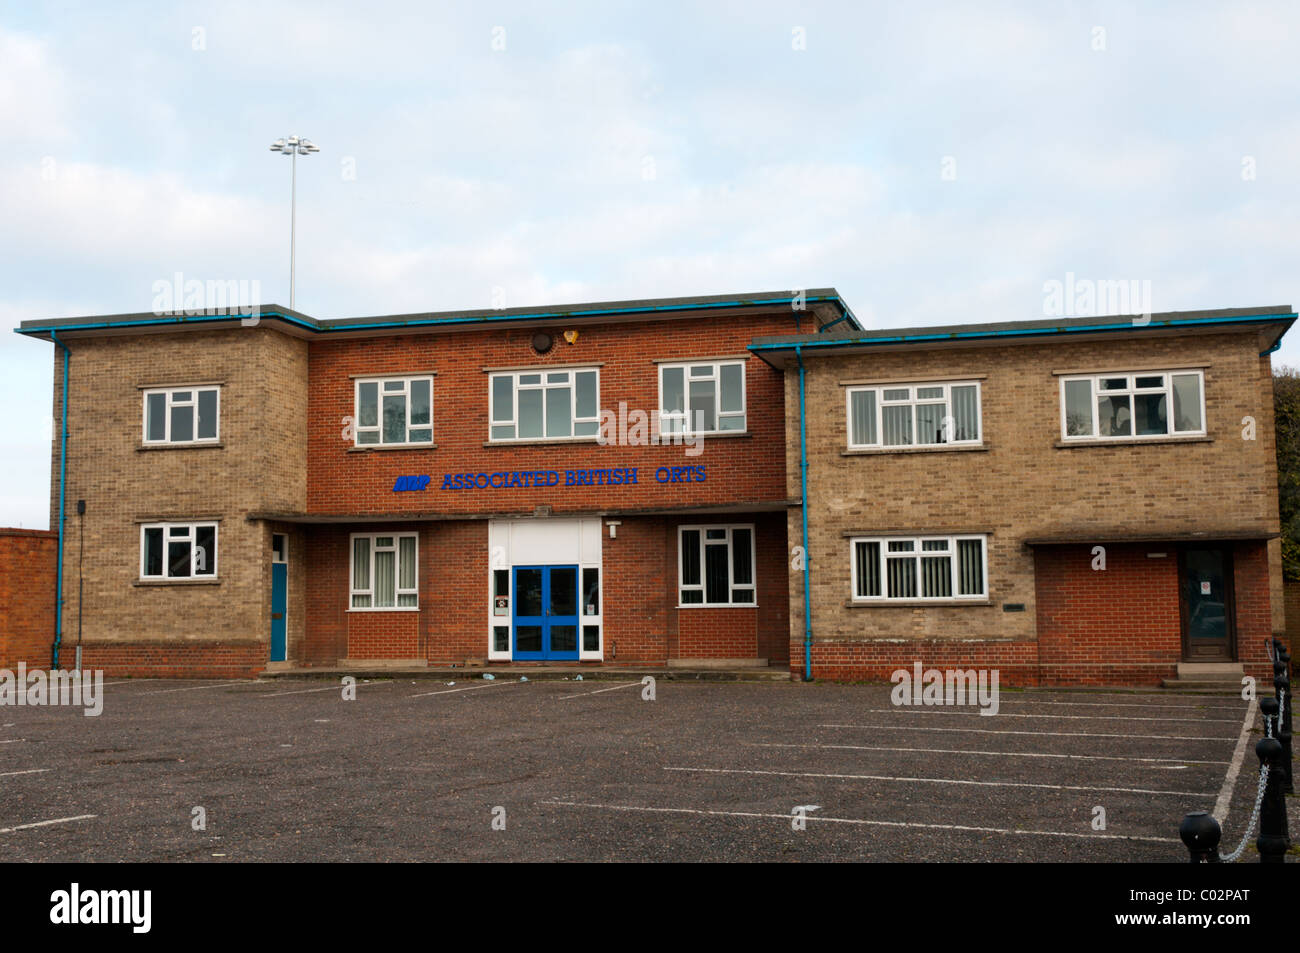 The offices of Associated British Ports at King's Lynn, Norfolk Stock Photo